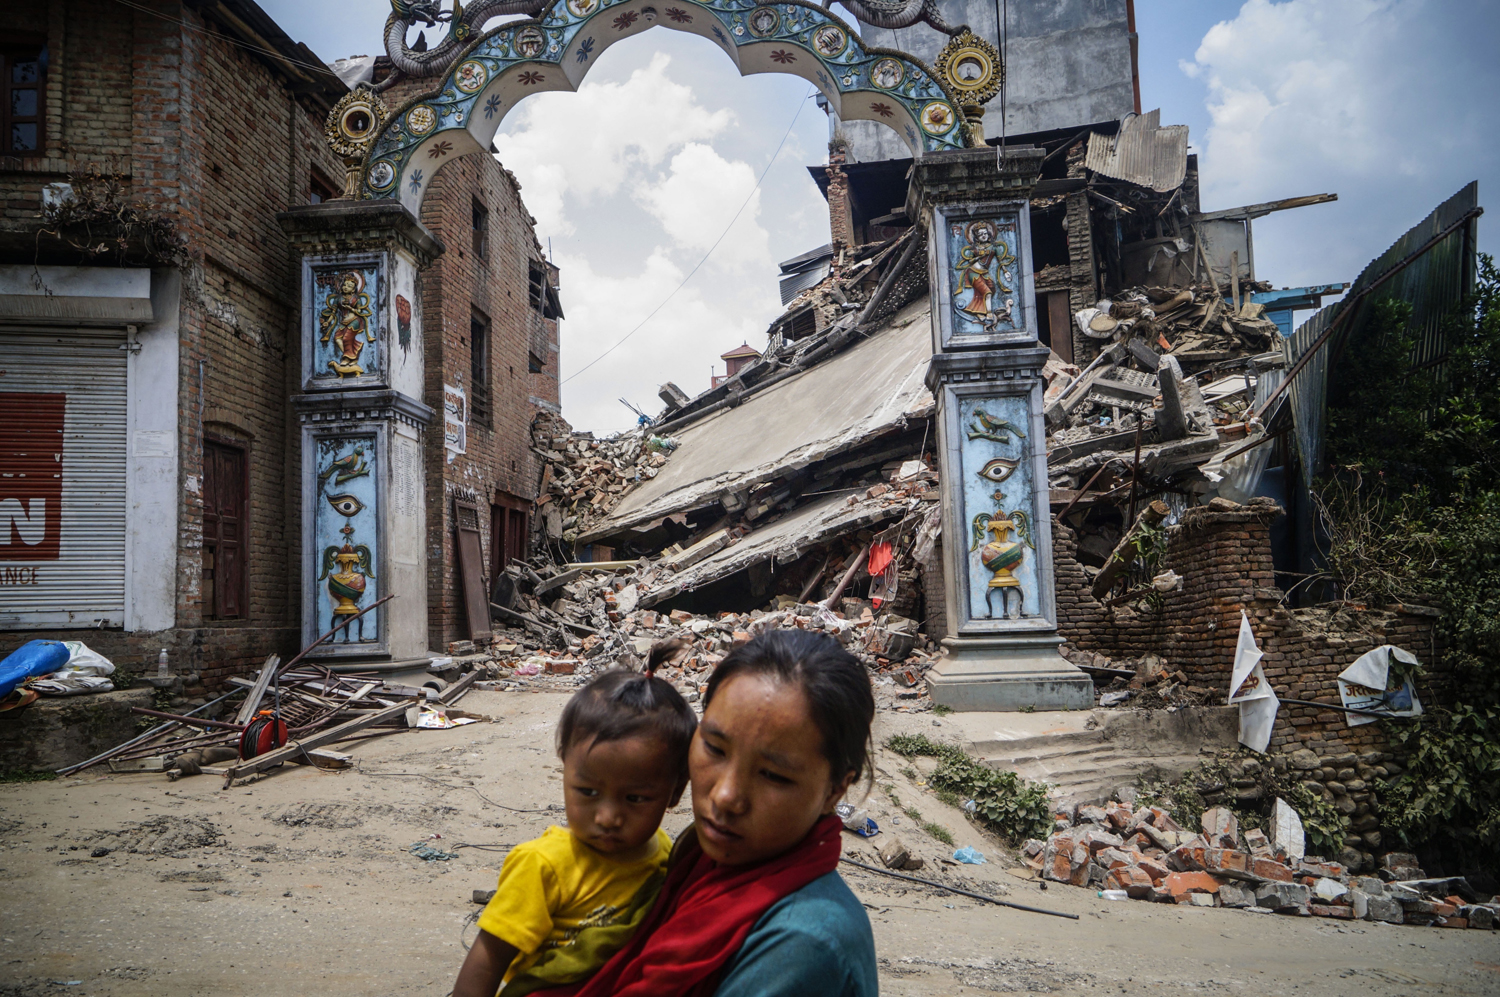 A Nepalese woman carrying her child walks past a destroyed building in Sankhu village in Kathmandu, Nepal on May 16, 2015. (Anadolu Agency —Getty Images)